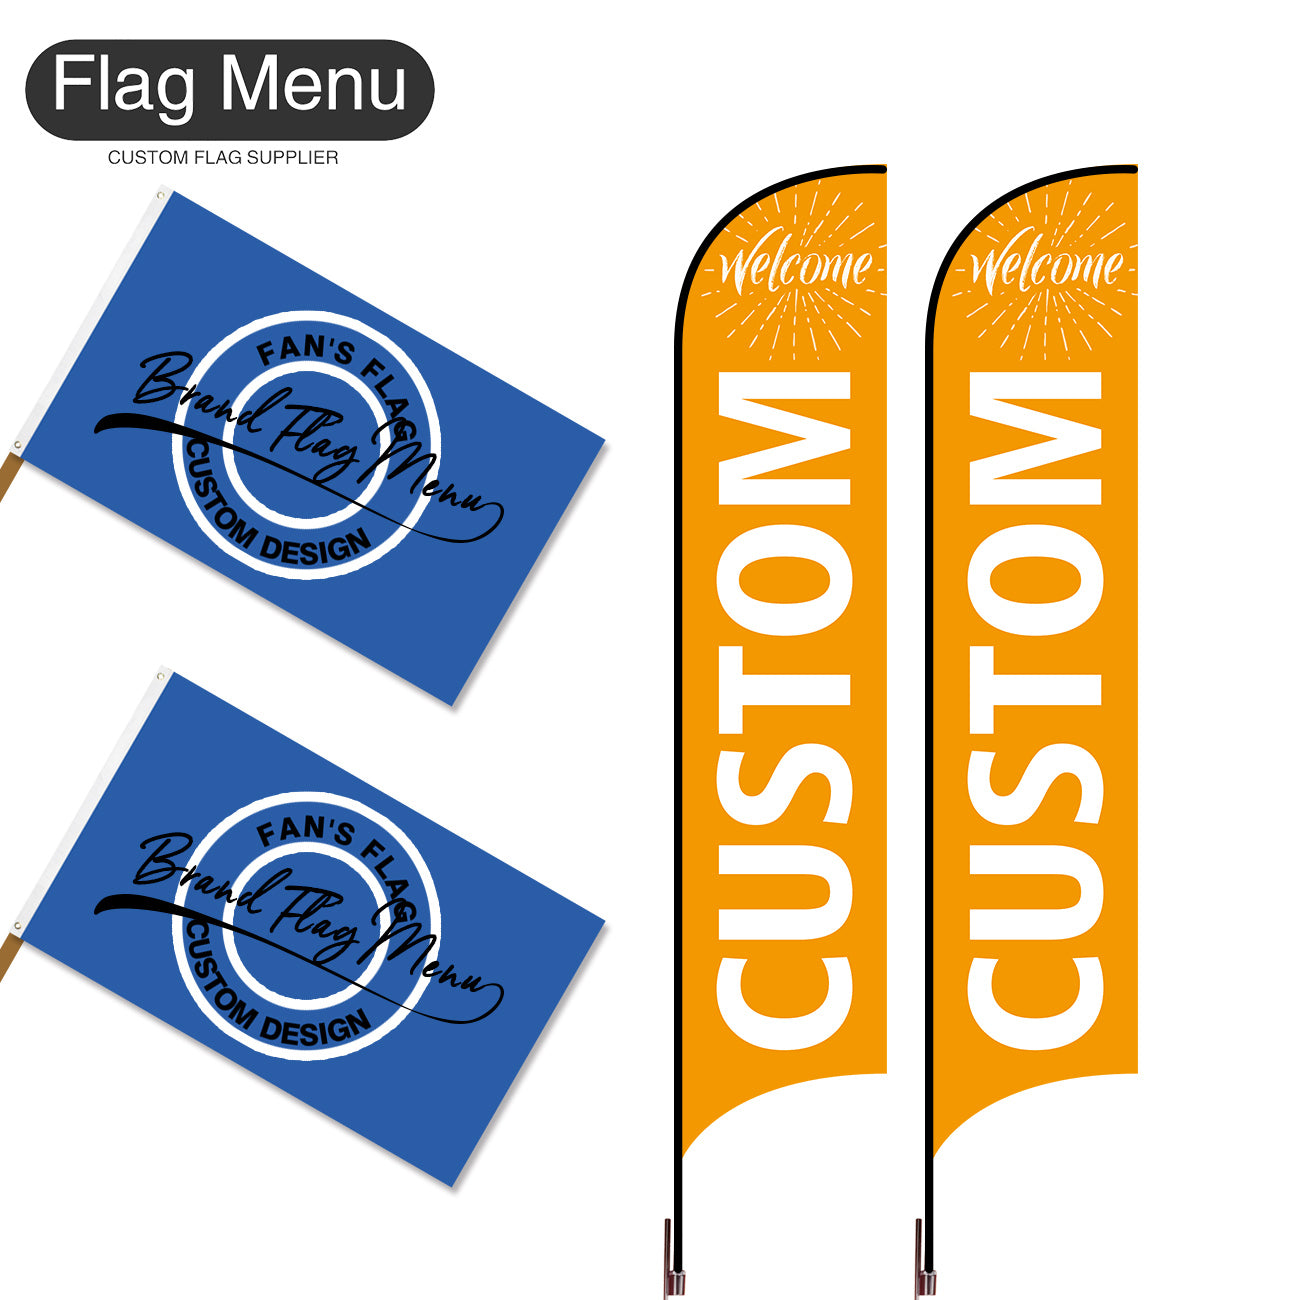 Outdoor Advertising Set - C-Orange-S - Feather Flag -Double Sided & 3'x5' Regular Flag -Single Sided-Cross & Water Bag-Flag Menu